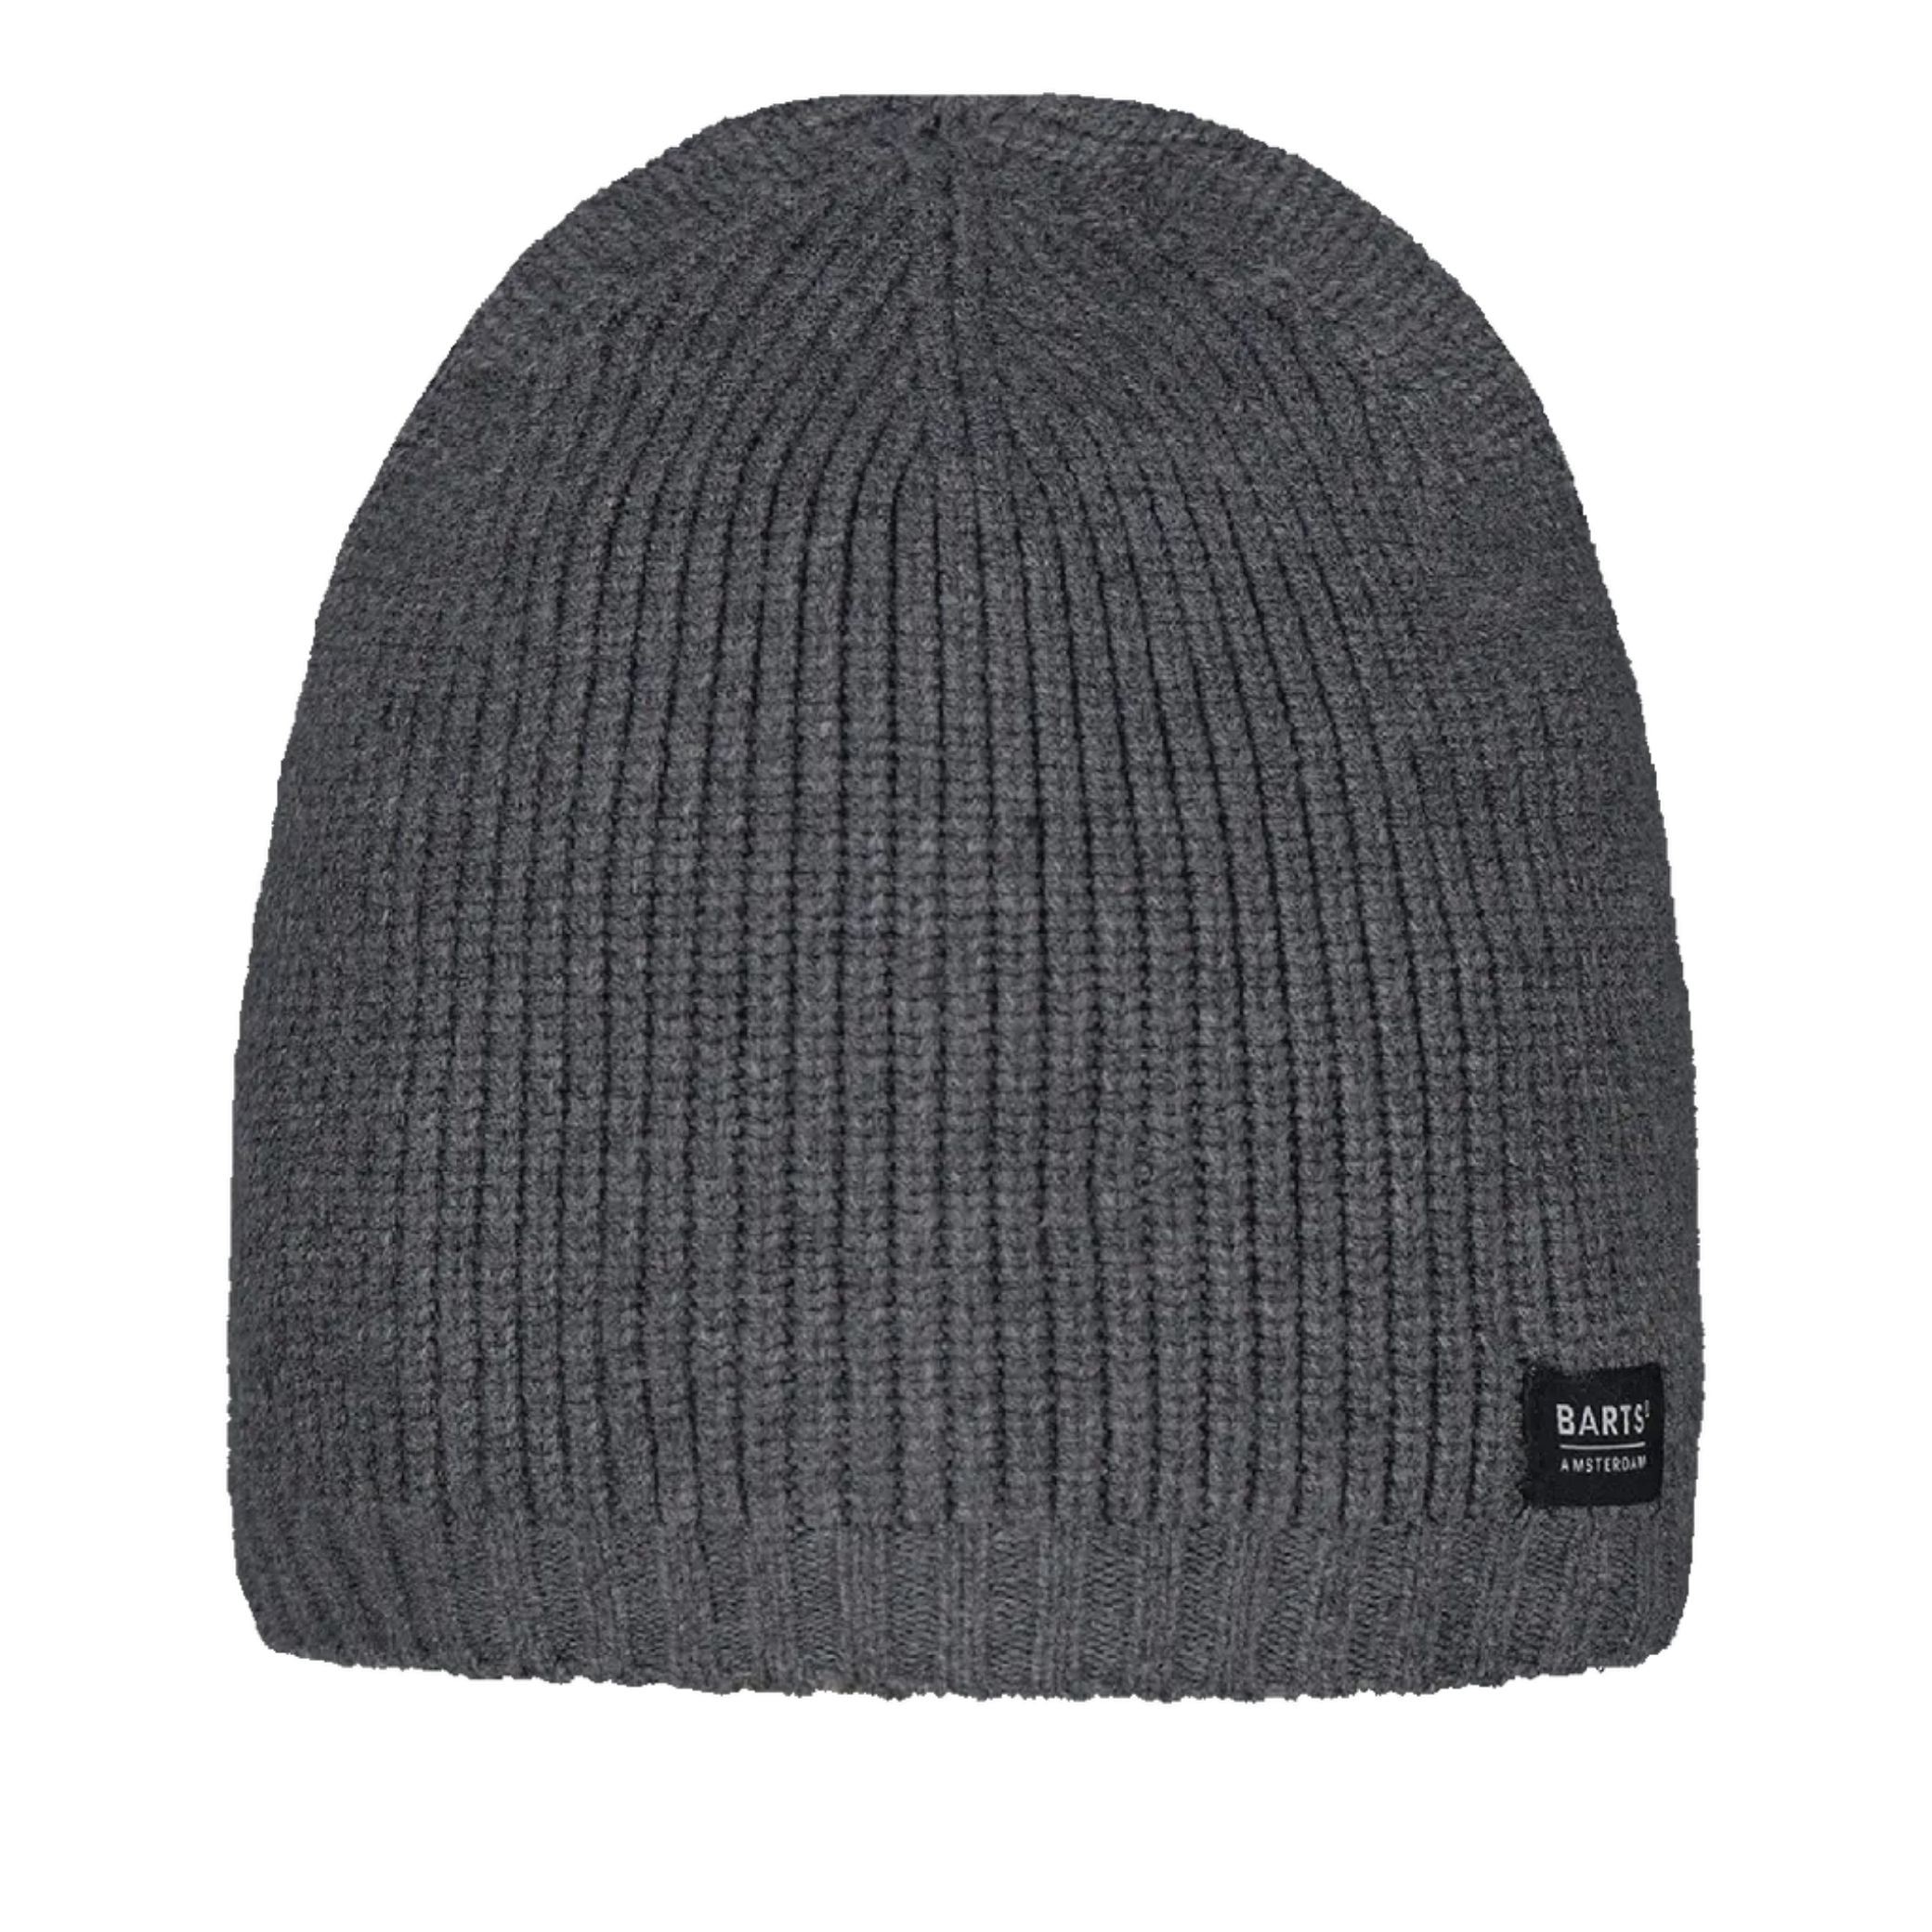 Barts Sloone Beanie | Barts | Portwest - The Outdoor Shop